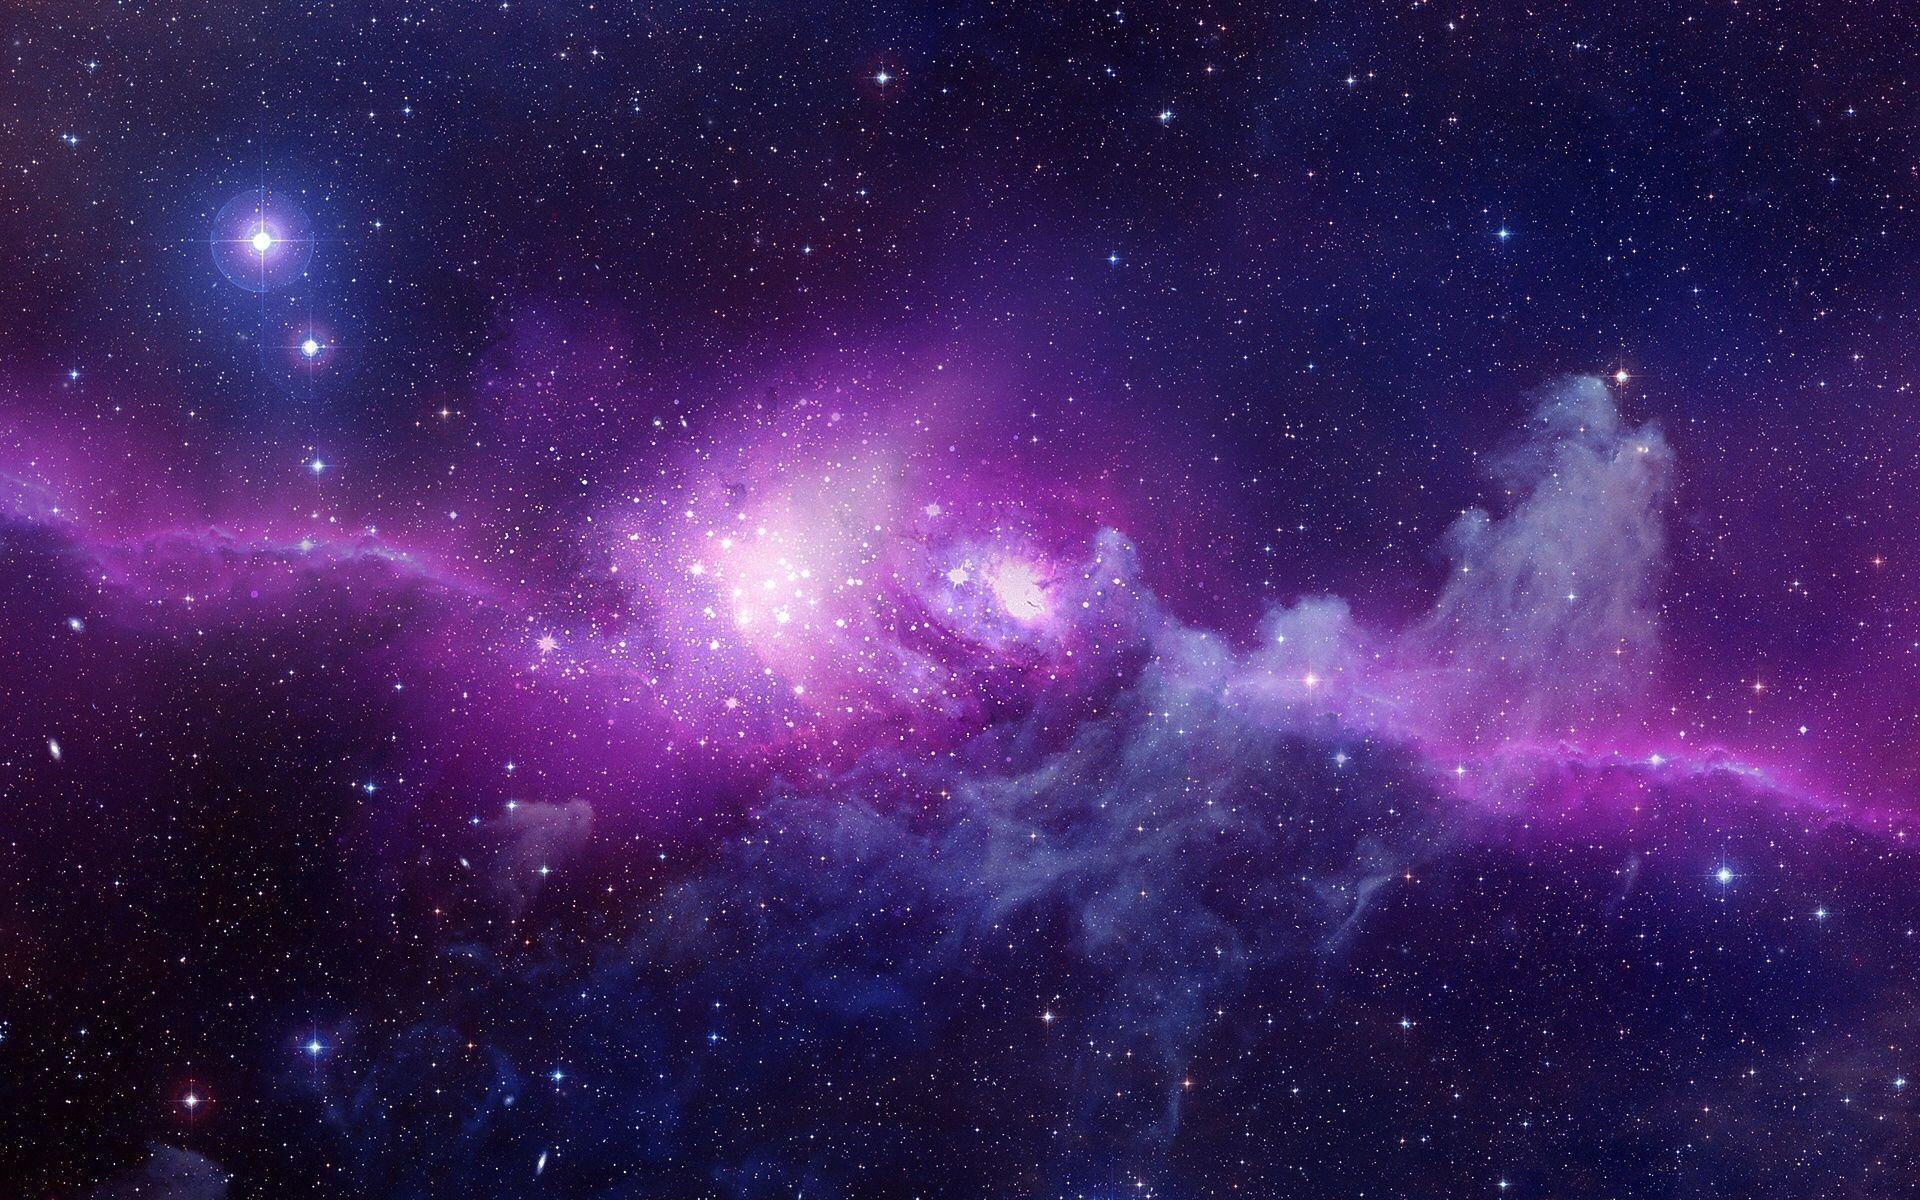 Violet space. Galaxy picture, HD galaxy wallpaper